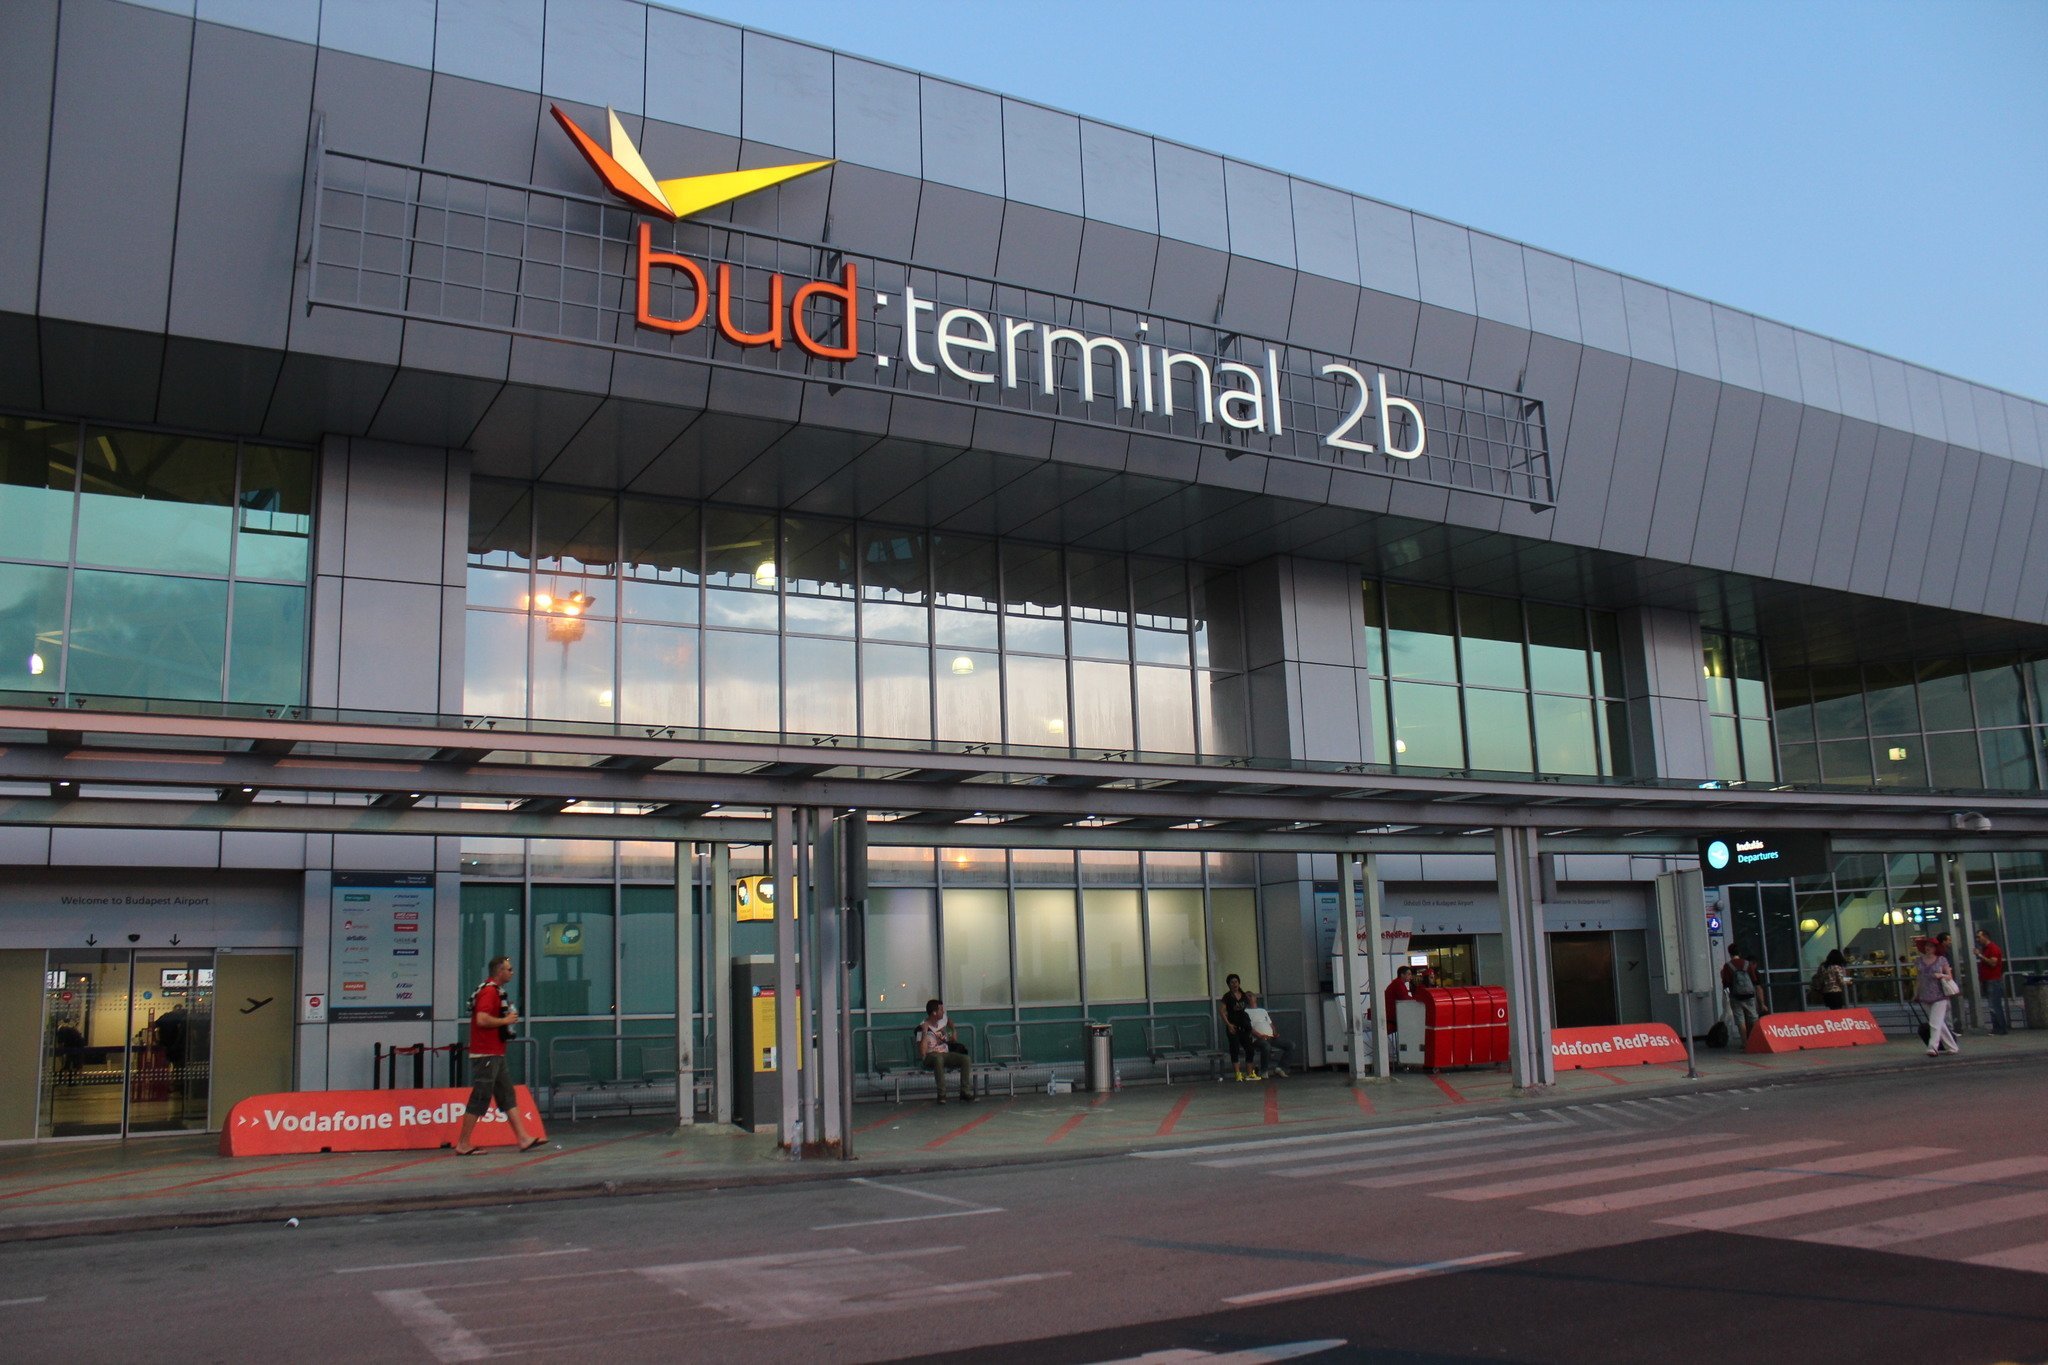 Overheated Iridium Container Shuts Down Liszt Ferenc 2b Terminal Briefly